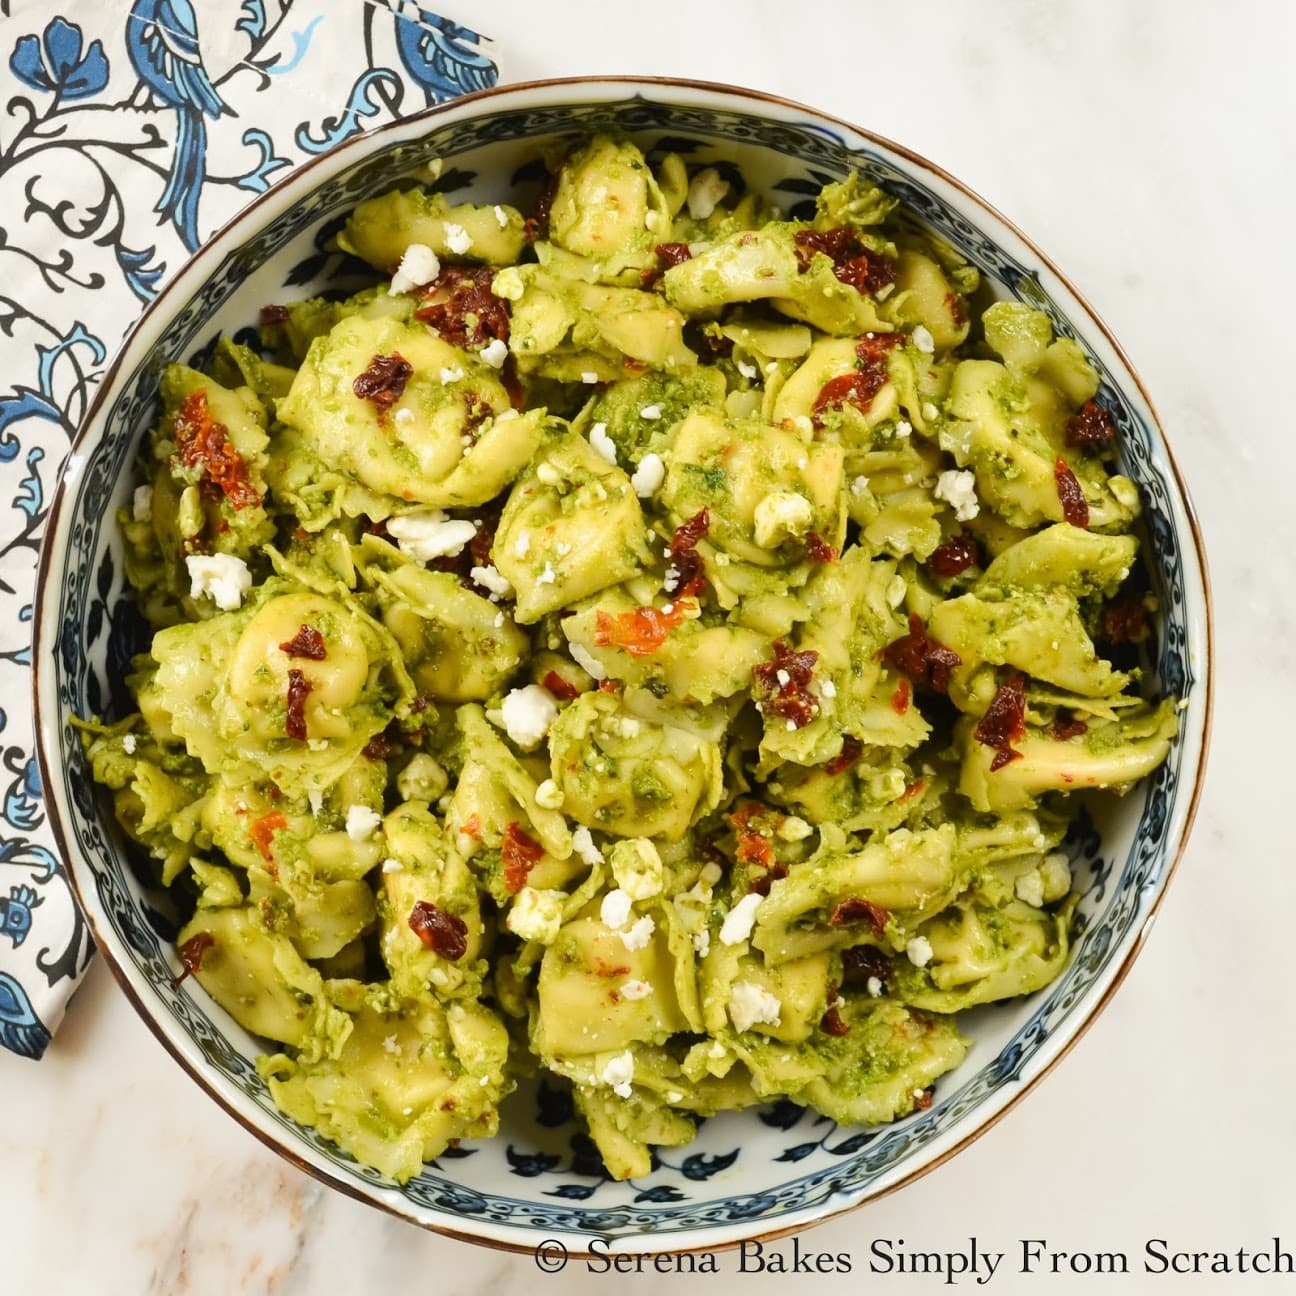 Tortellini Pesto Pasta Salad with Feta and Sun-Dried Tomatoes is a favorite Pasta Salad for a easy lunch, dinner or side dish from Serena Bakes Simply From Scratch.